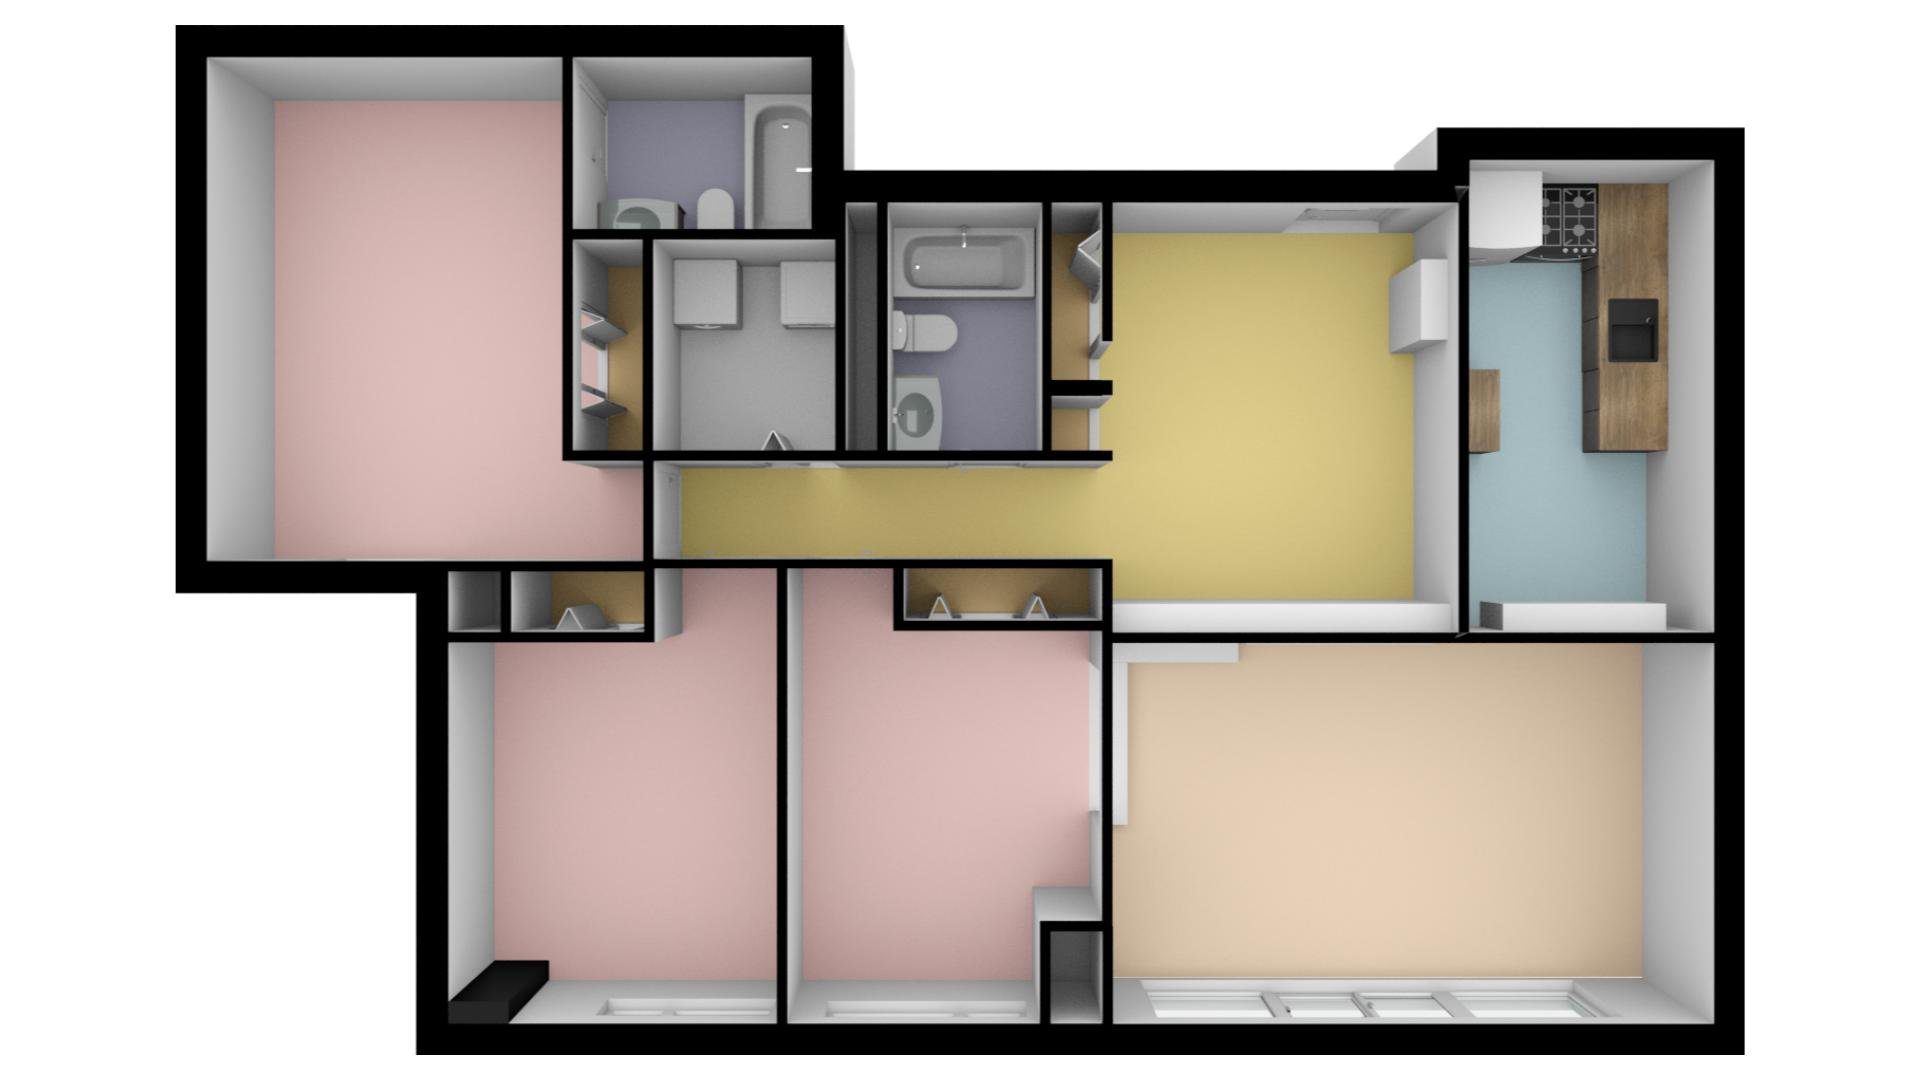 A floor plan of a room with pink walls.